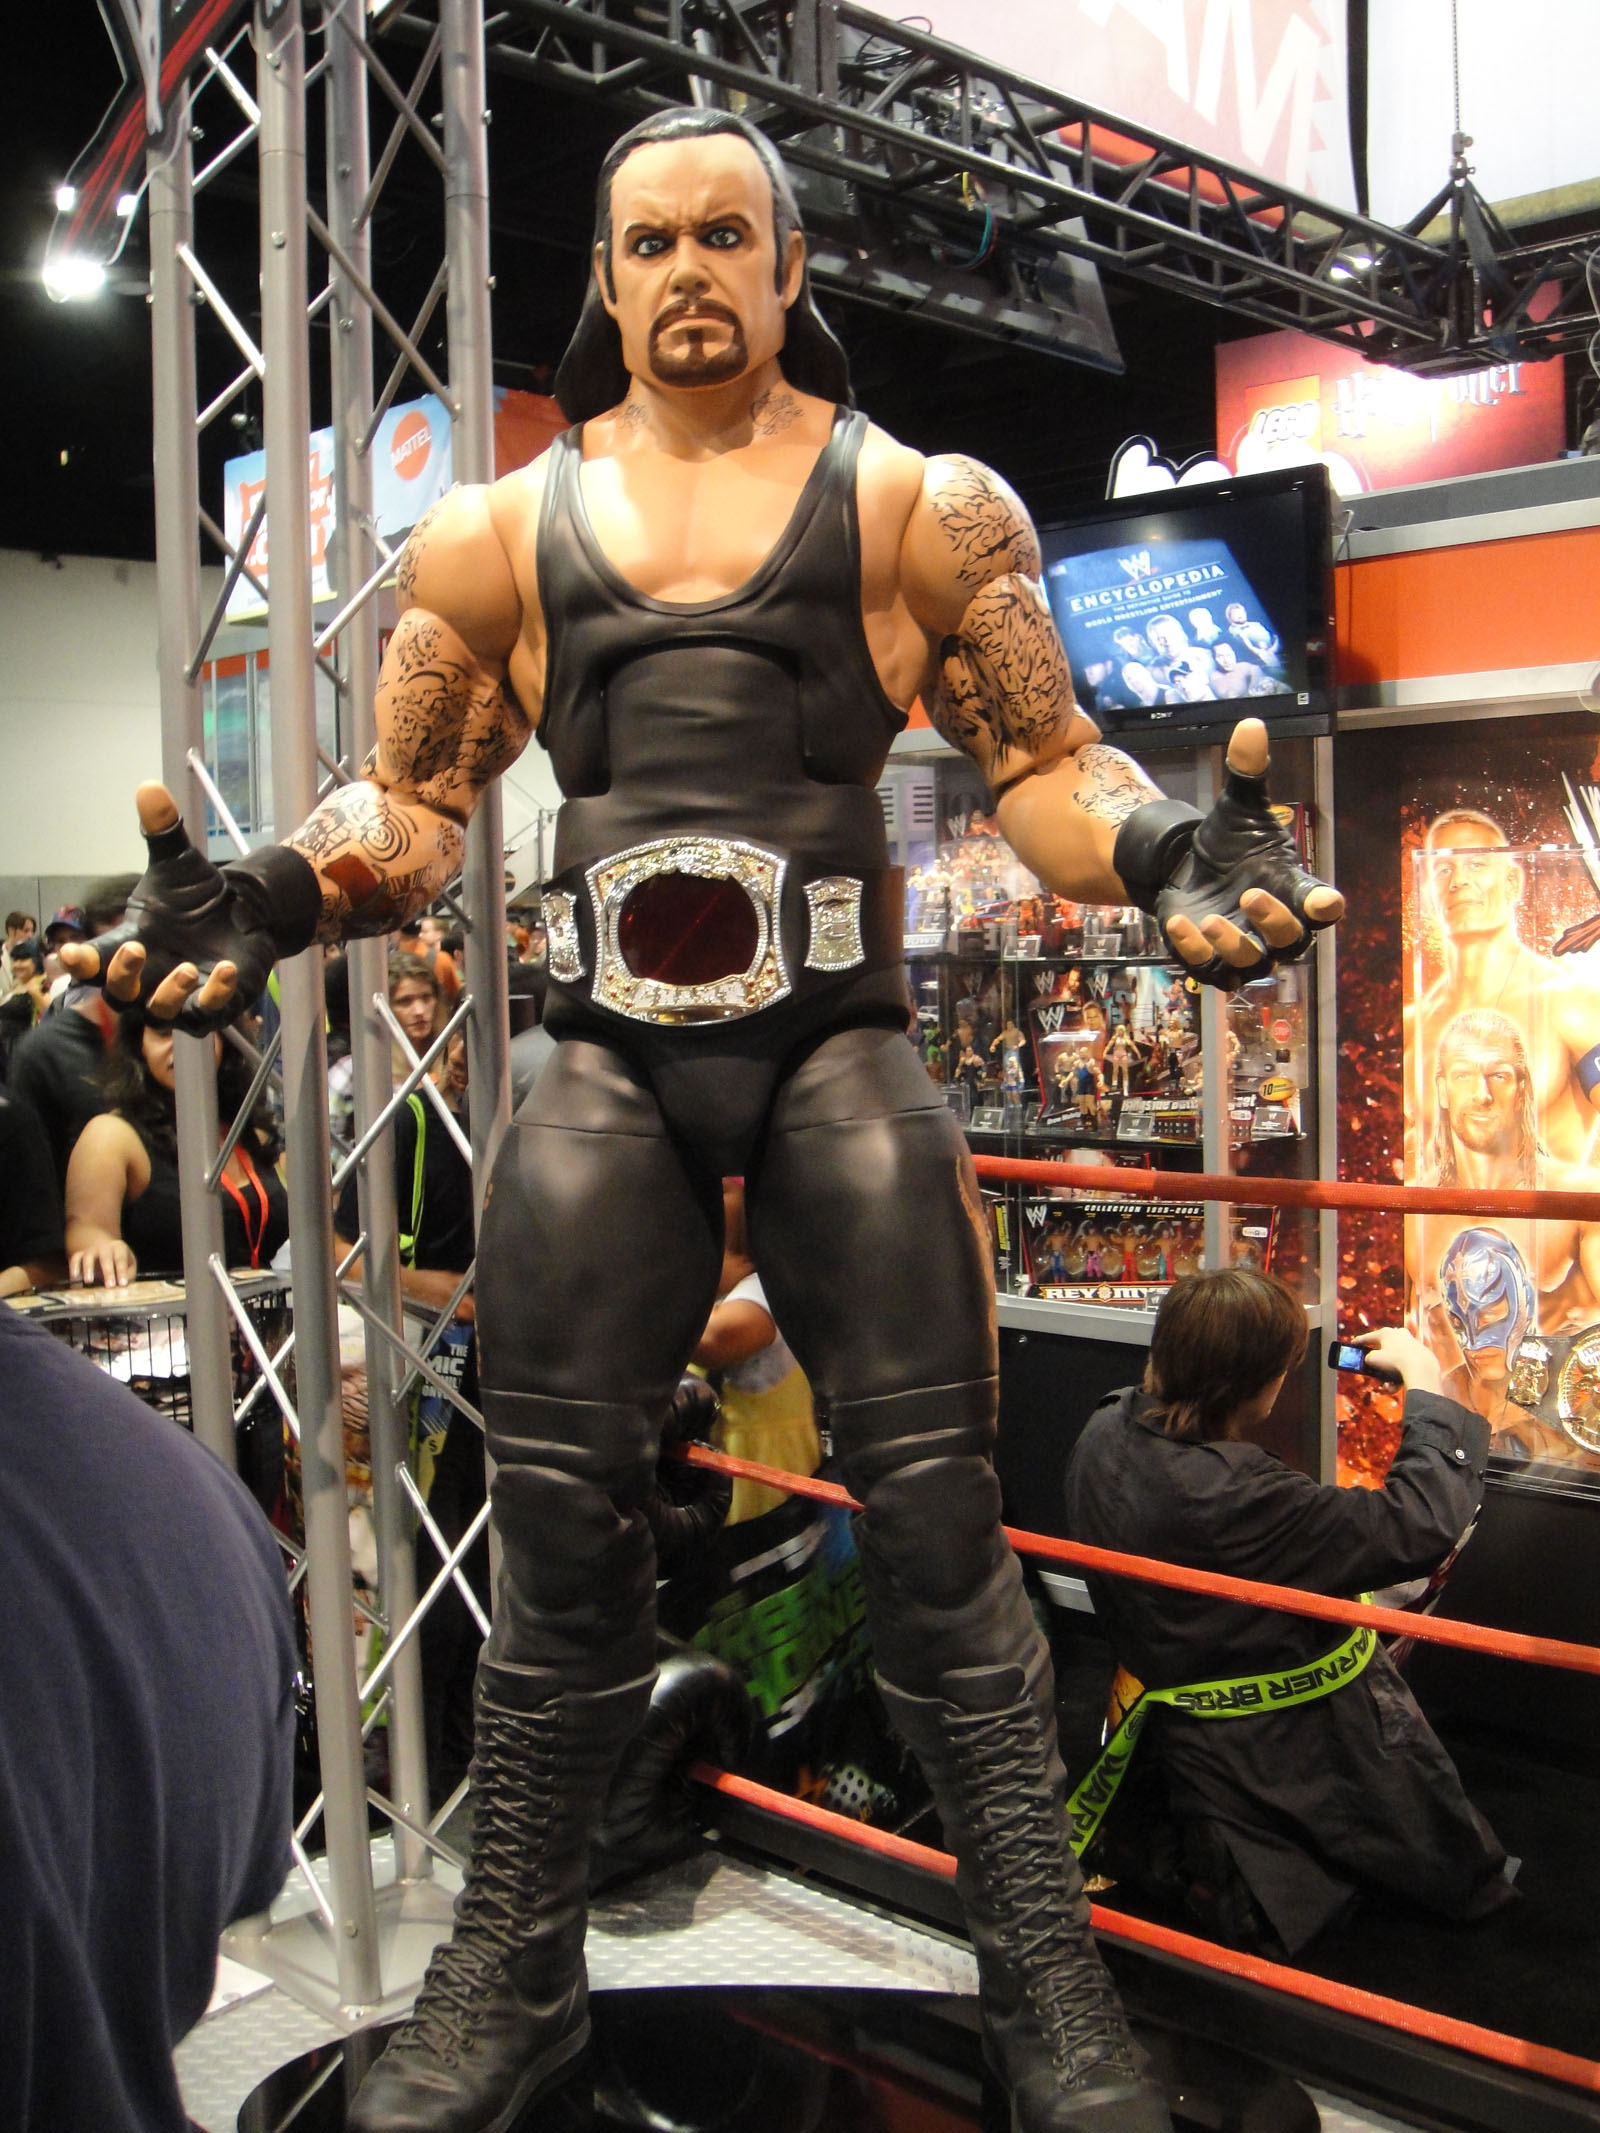 a statue of wrestler standing on a wrestling ring